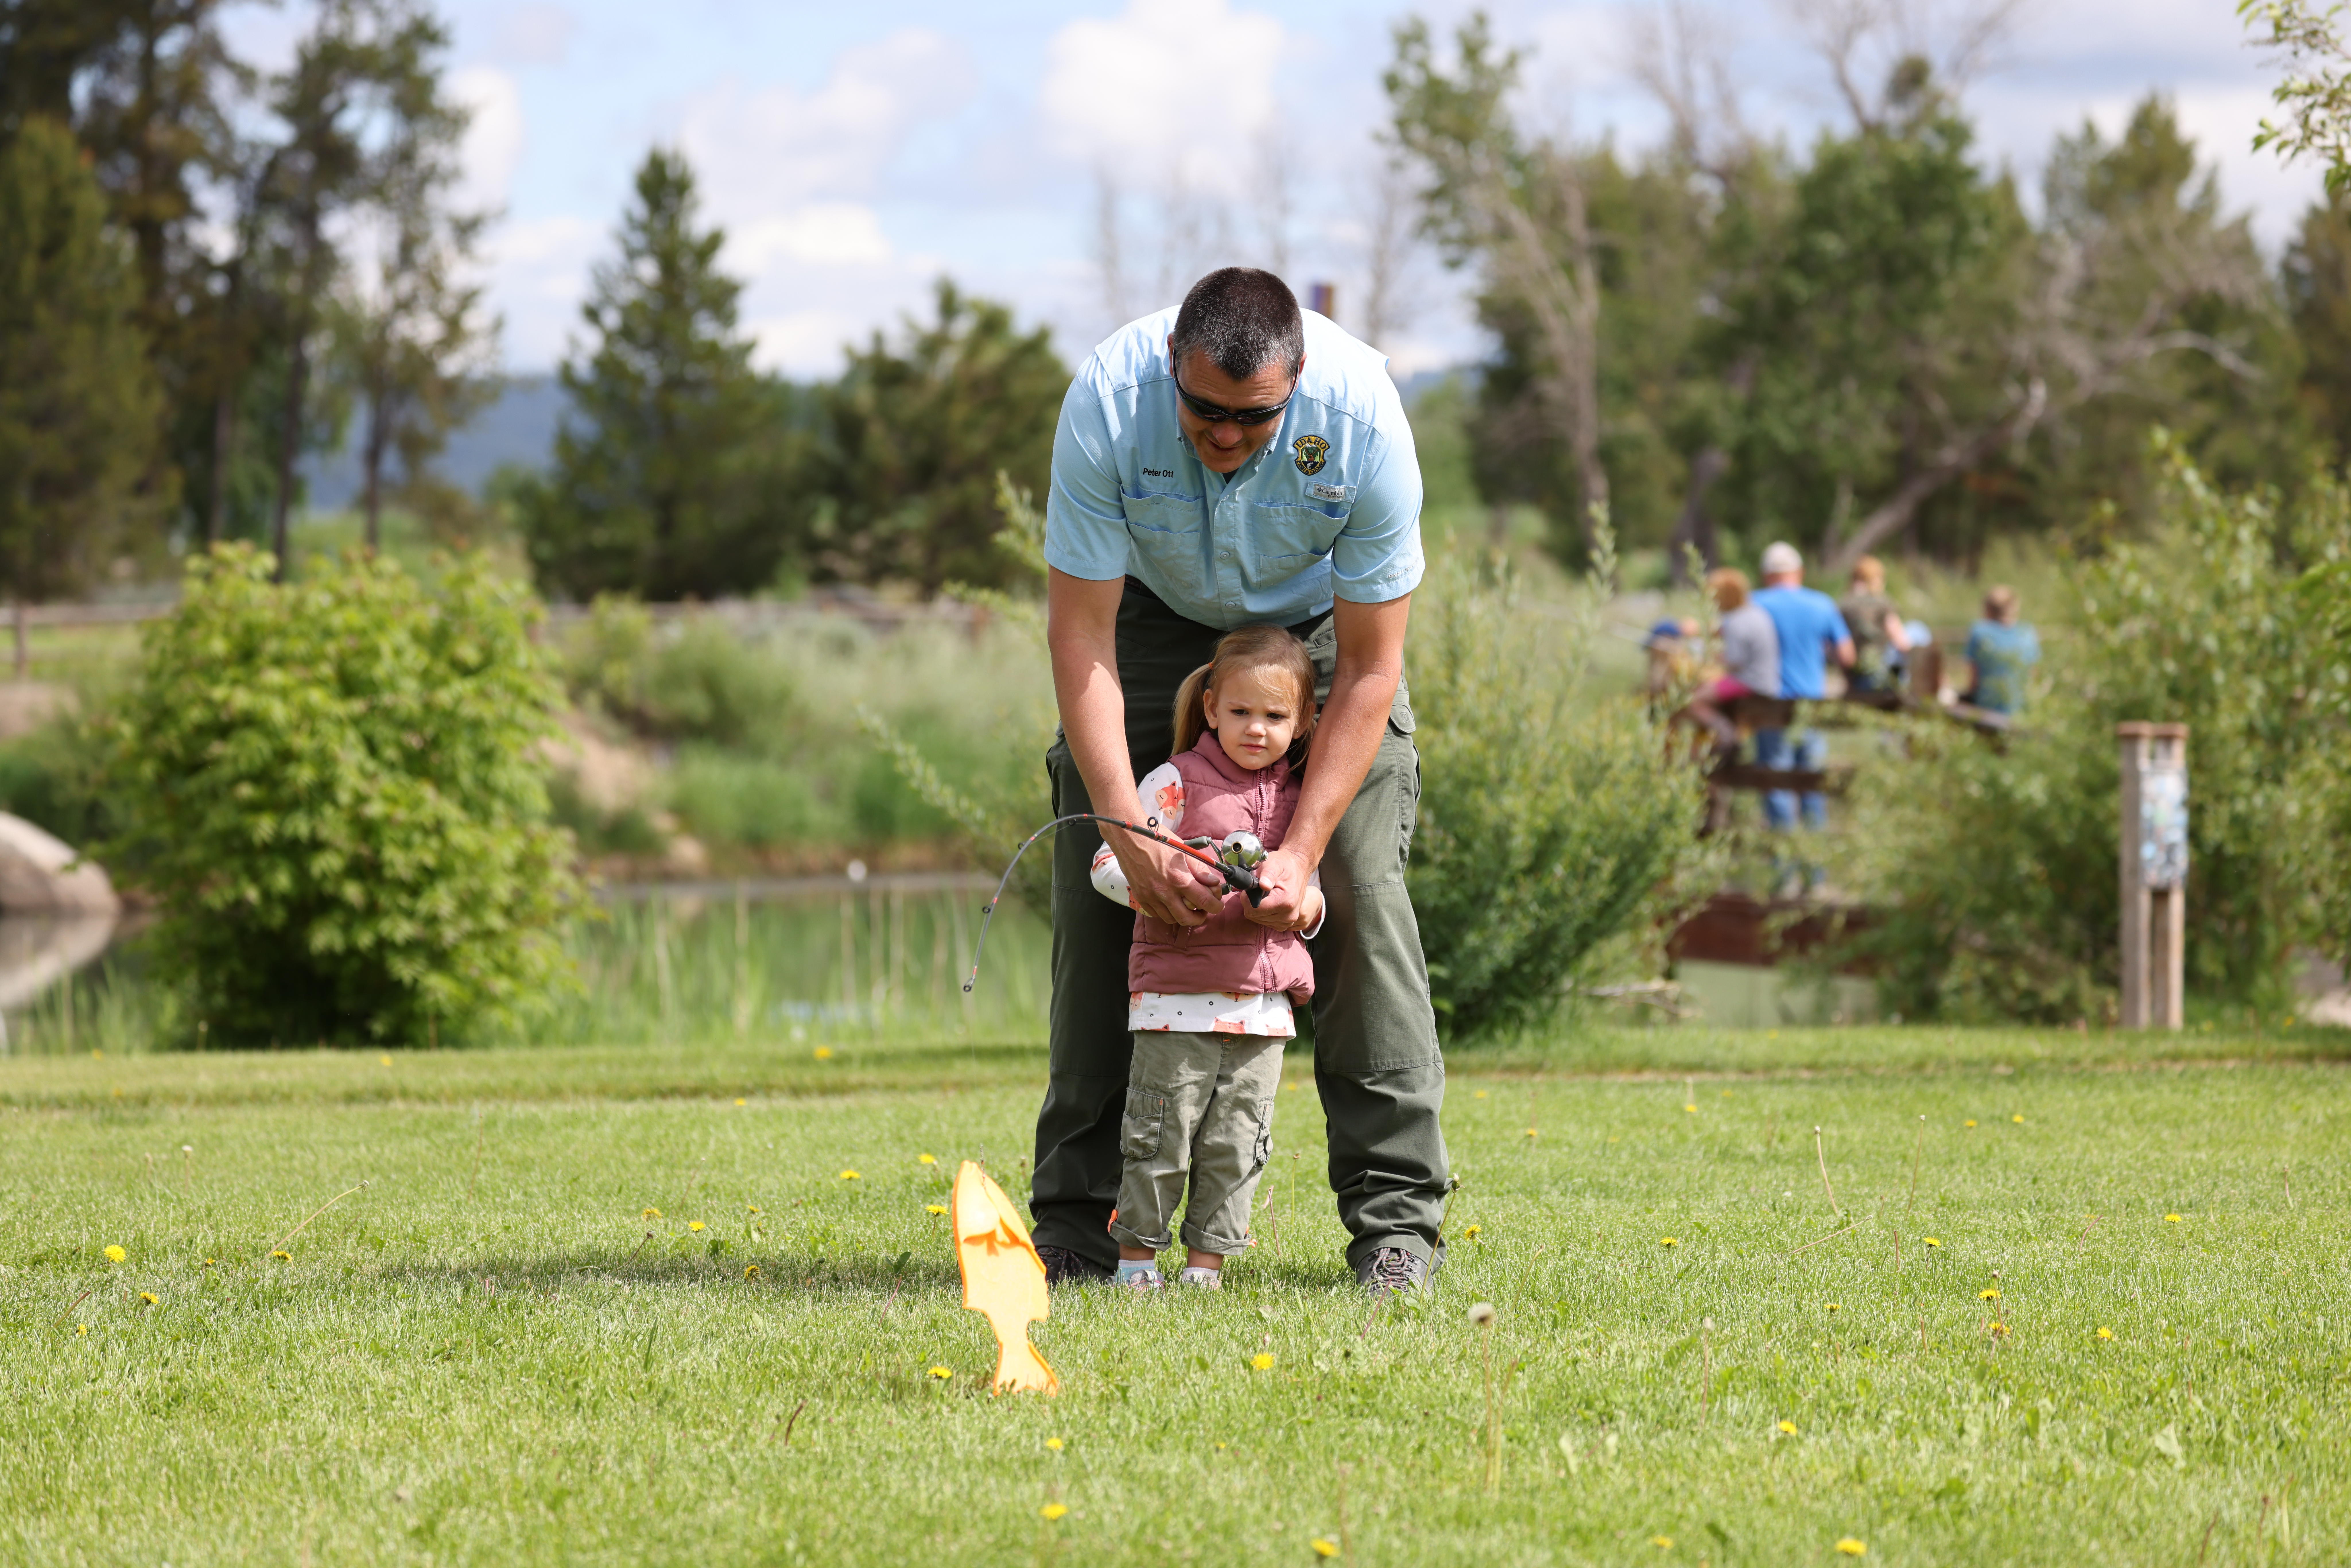 A Fish and Game employee helps a young girl reel in a plastic fish with a casting bobber.